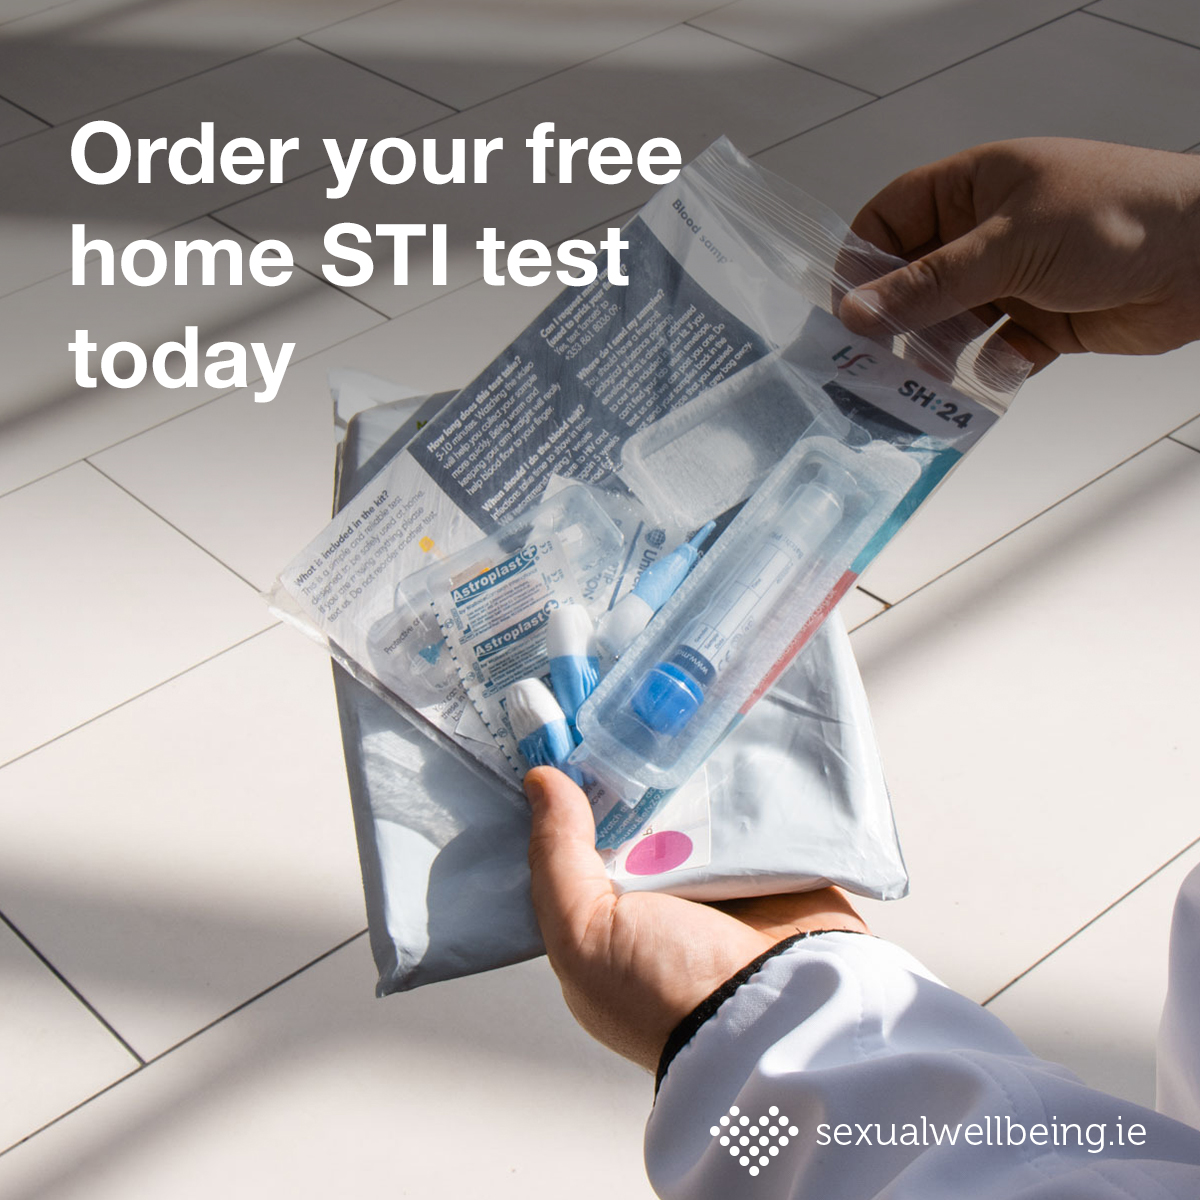 In 2023 there were 119,000 free home STI tests ordered in the Republic of Ireland. Remember it’s easy, free and discrete. 

Order yours today: bit.ly/4dmkPzs

#SexualWellbeing | #STITest